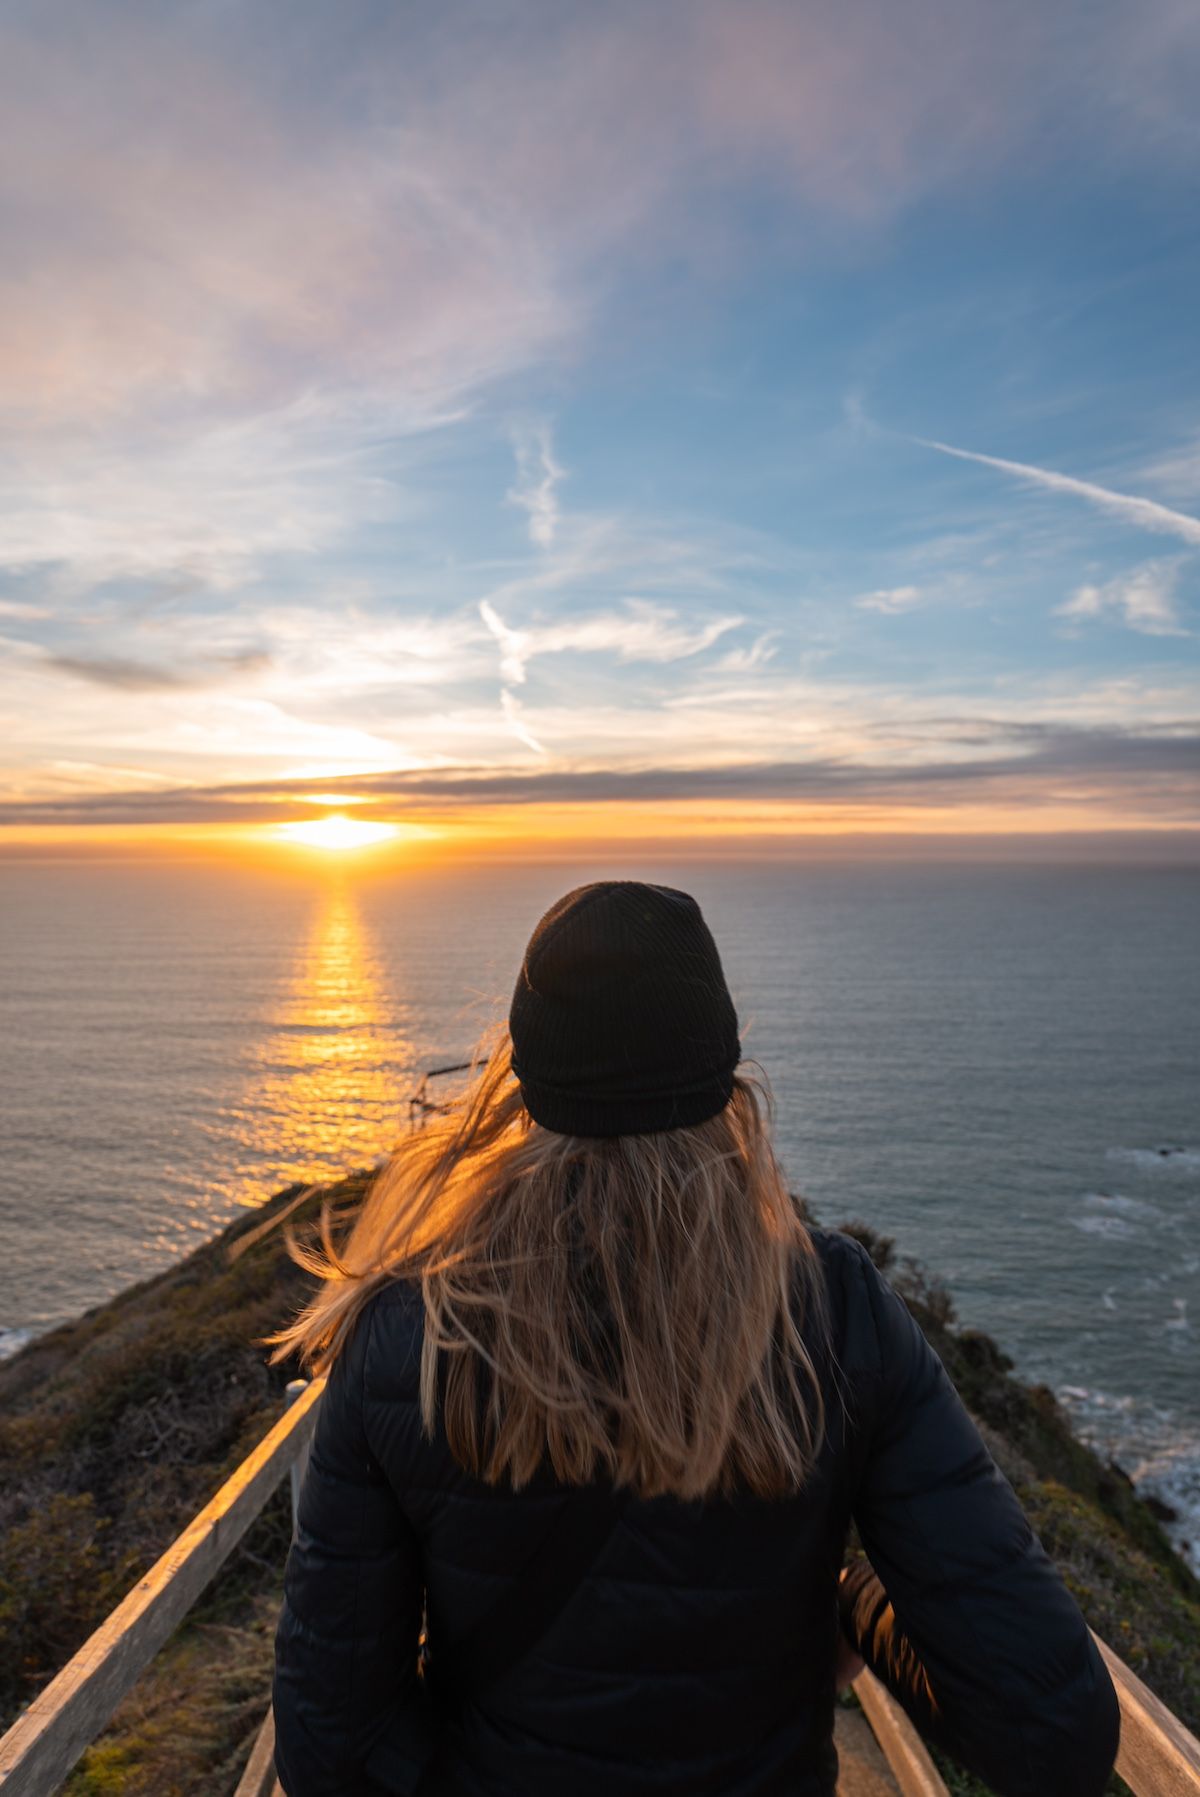 A view looking over the shoulder of a woman wearing a black beanie, looking out towards the Muir Beach Overlook, bathed in the golden light of sunset.